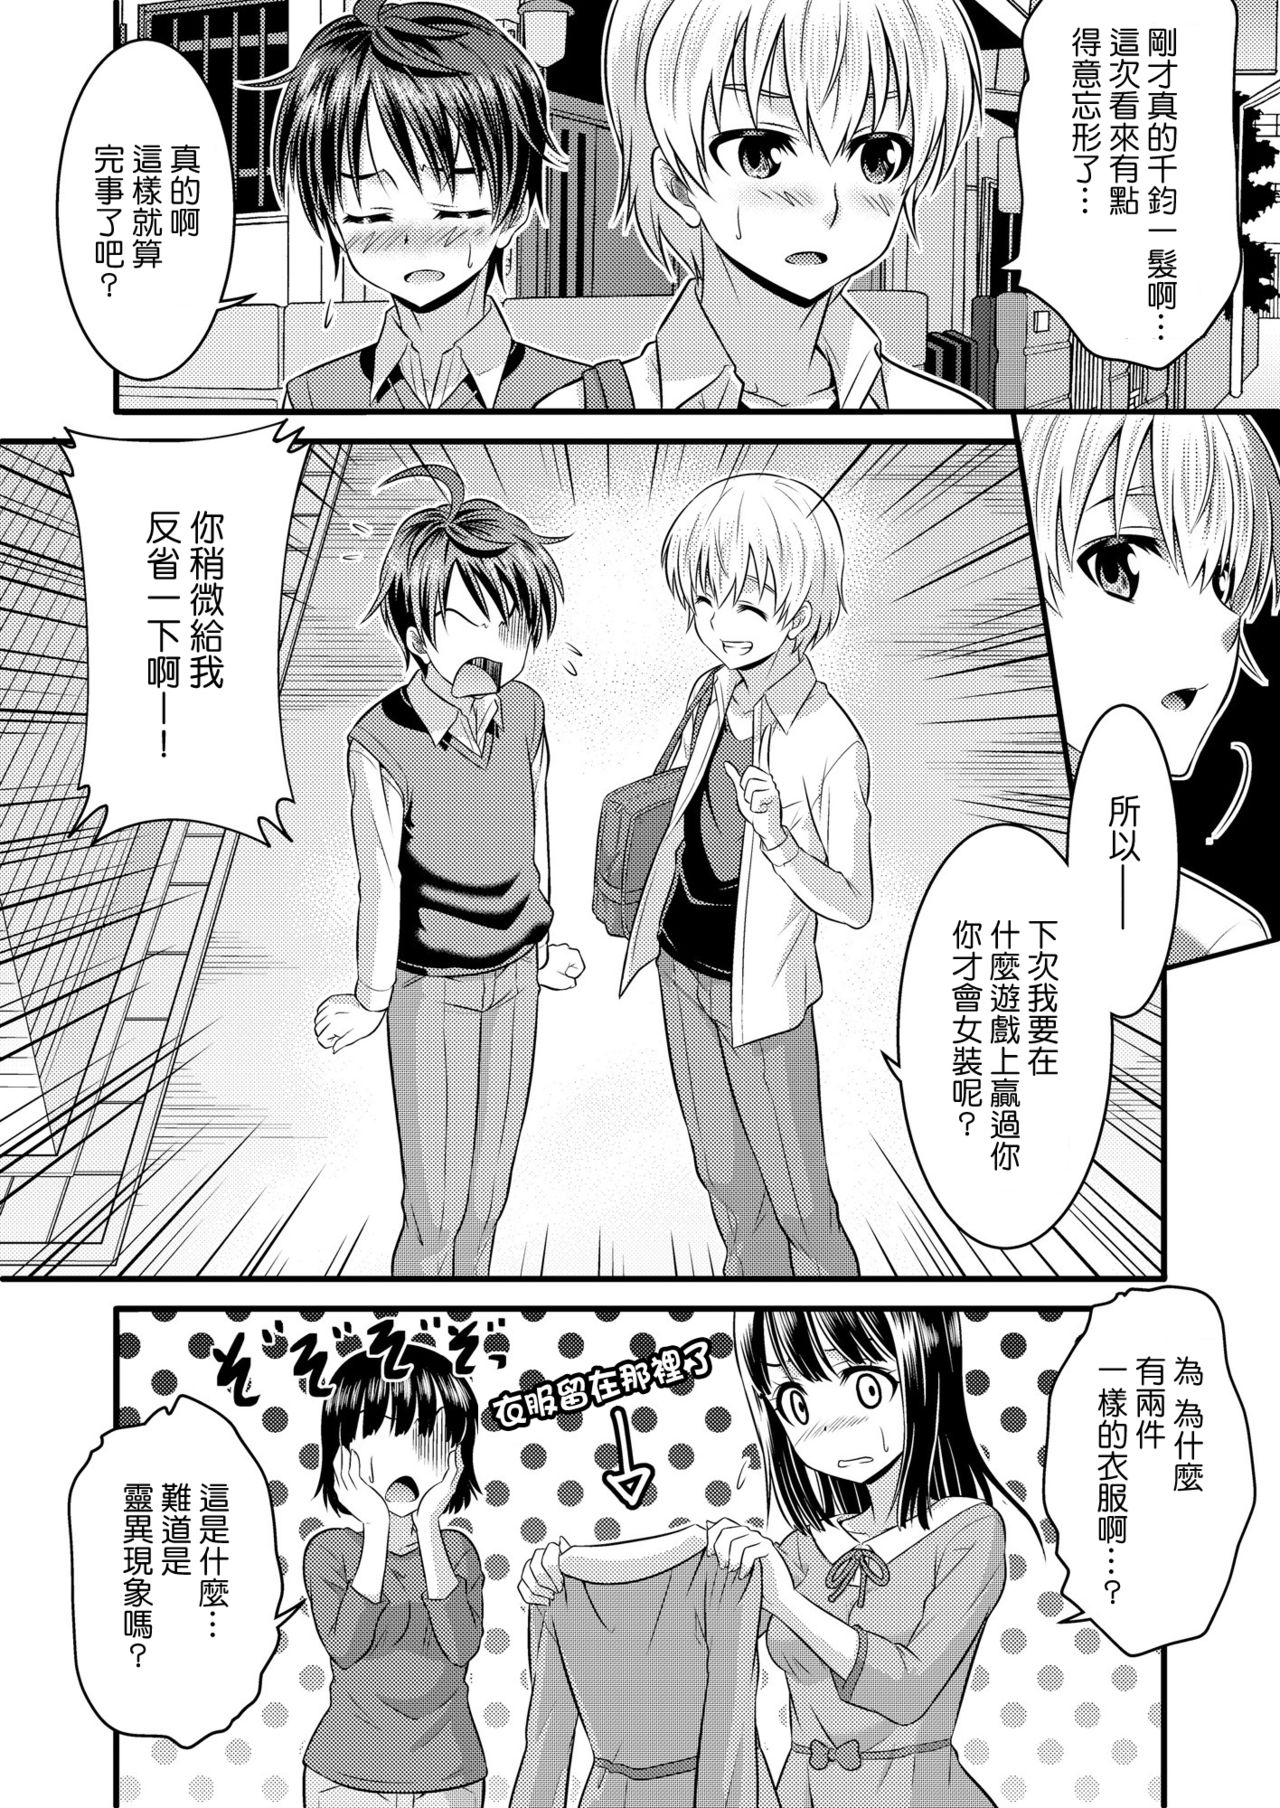 Metamorph ★ Coordination - I Become Whatever Girl I Crossdress As~ [Sister Arc, Classmate Arc] [Chinese] [瑞树汉化组] page 33 full